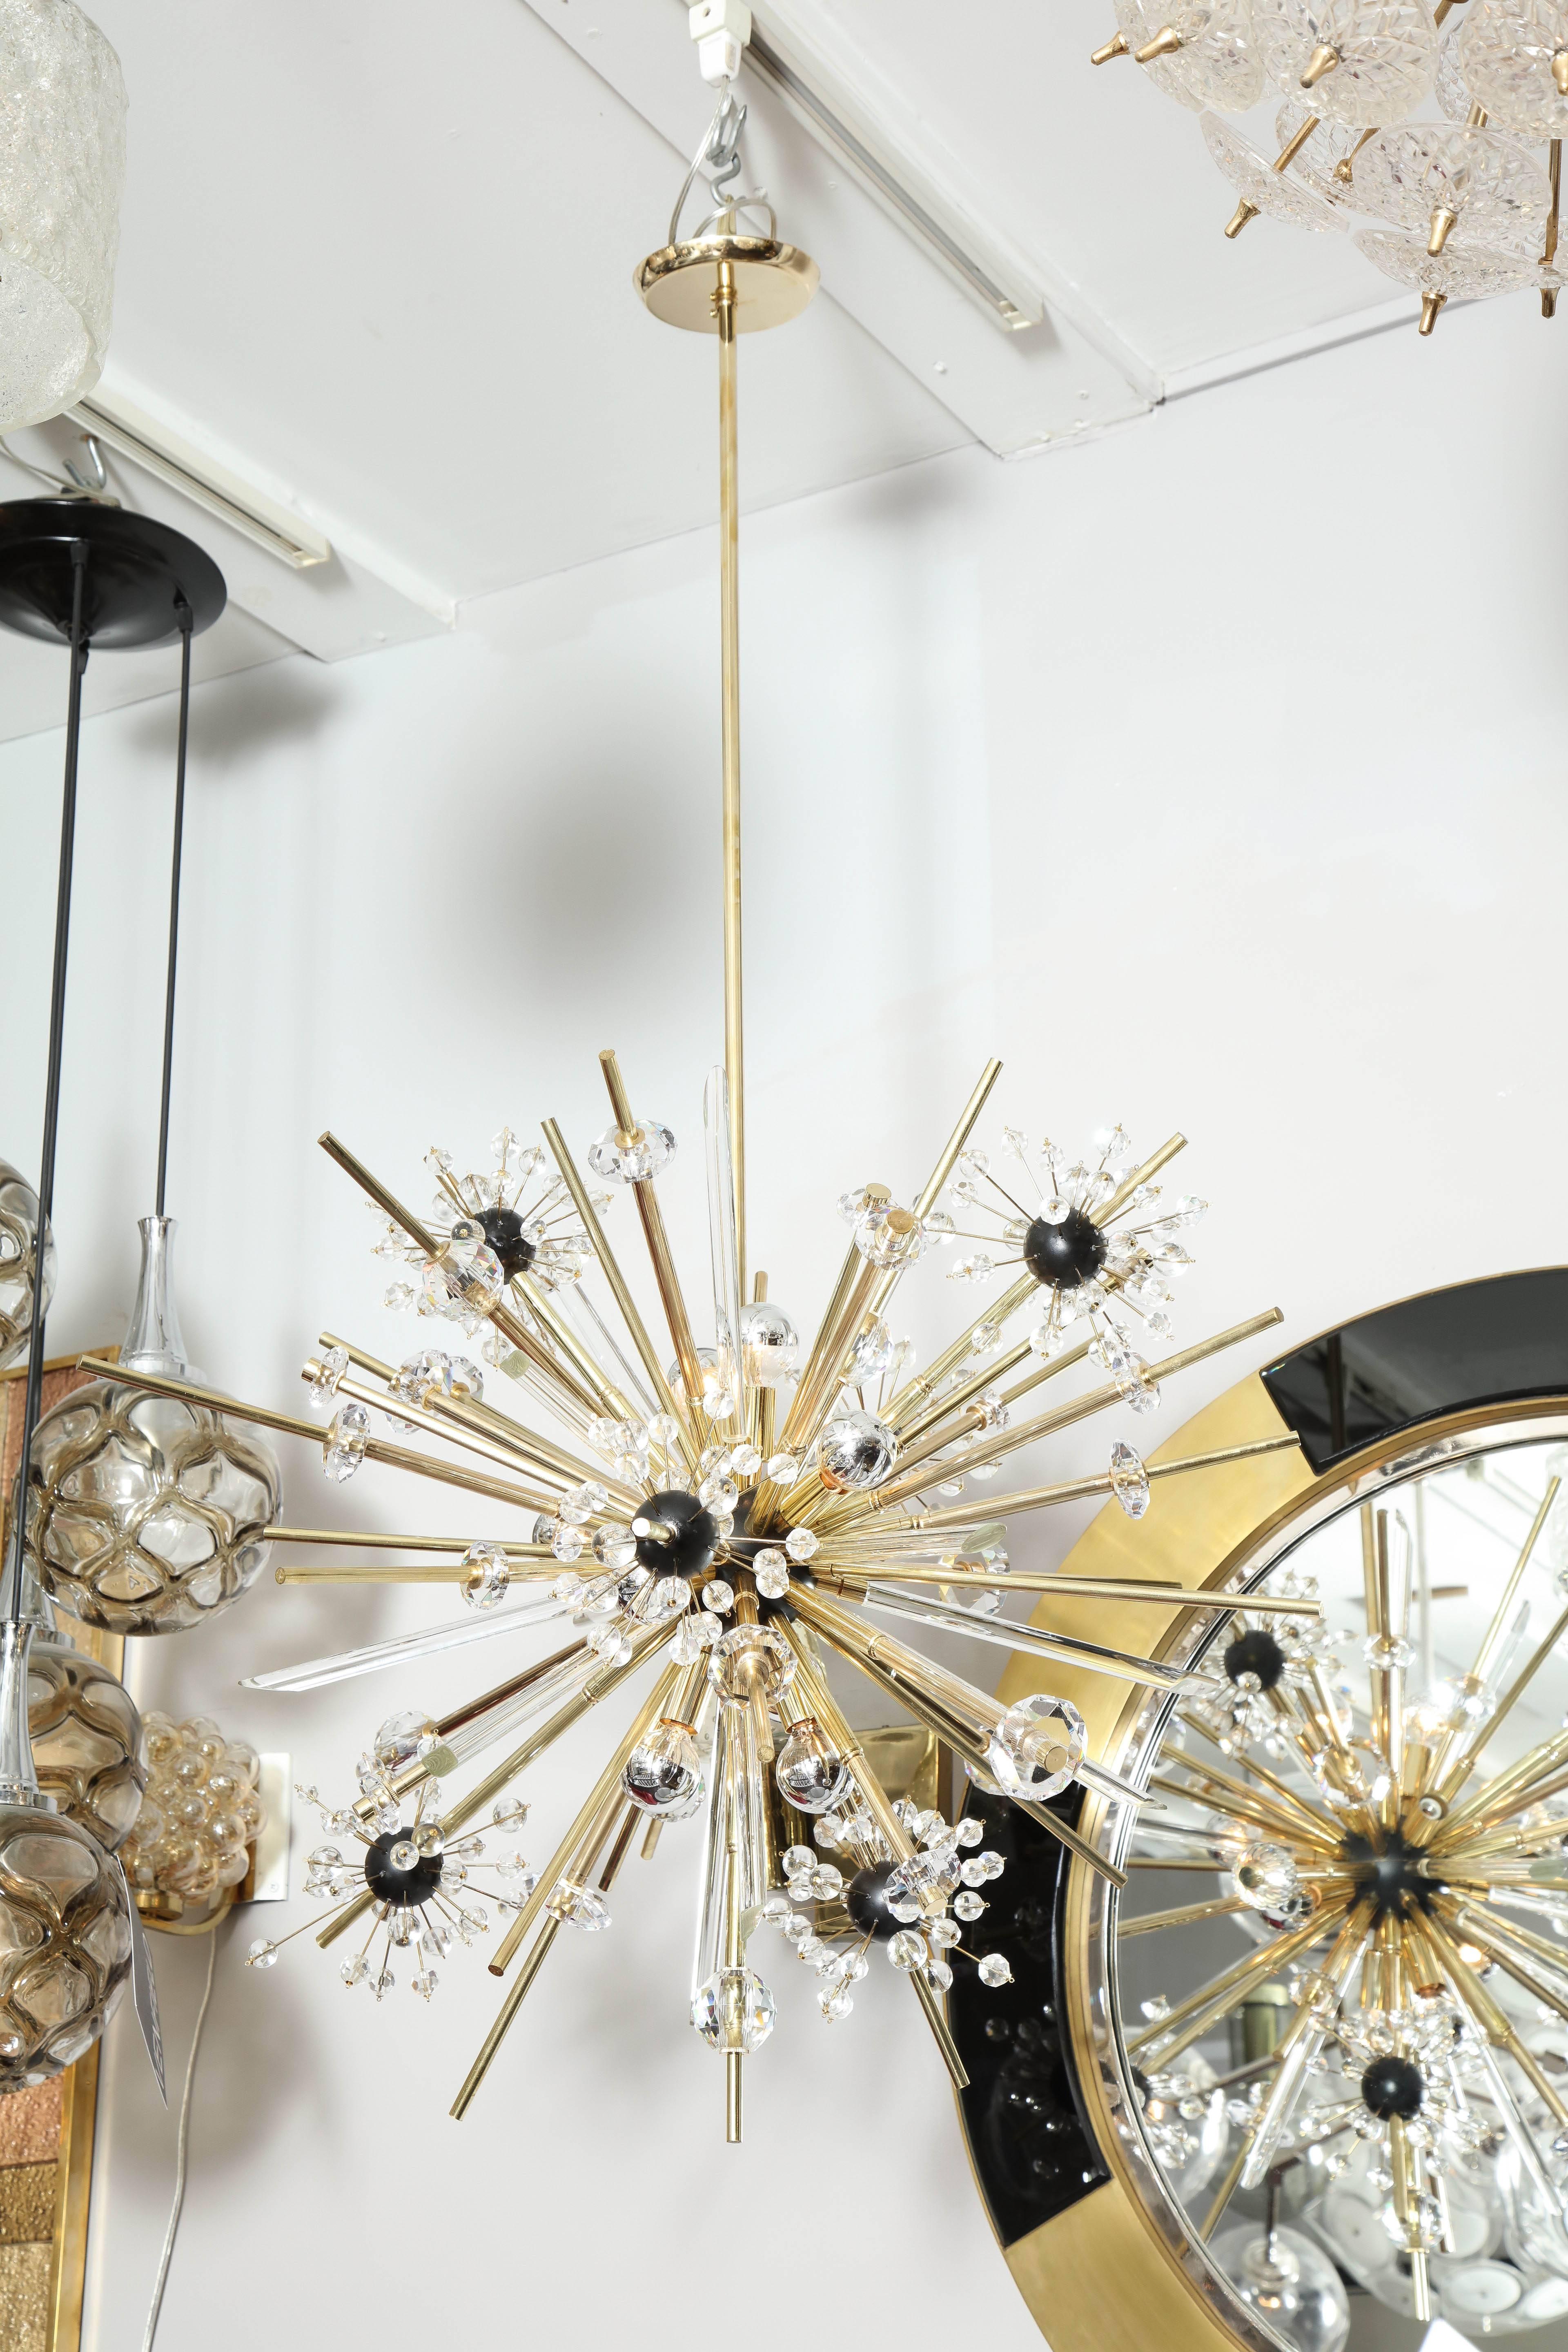 Exquisite crystal and polished brass Sputnik chandelier with ebonized spheres.